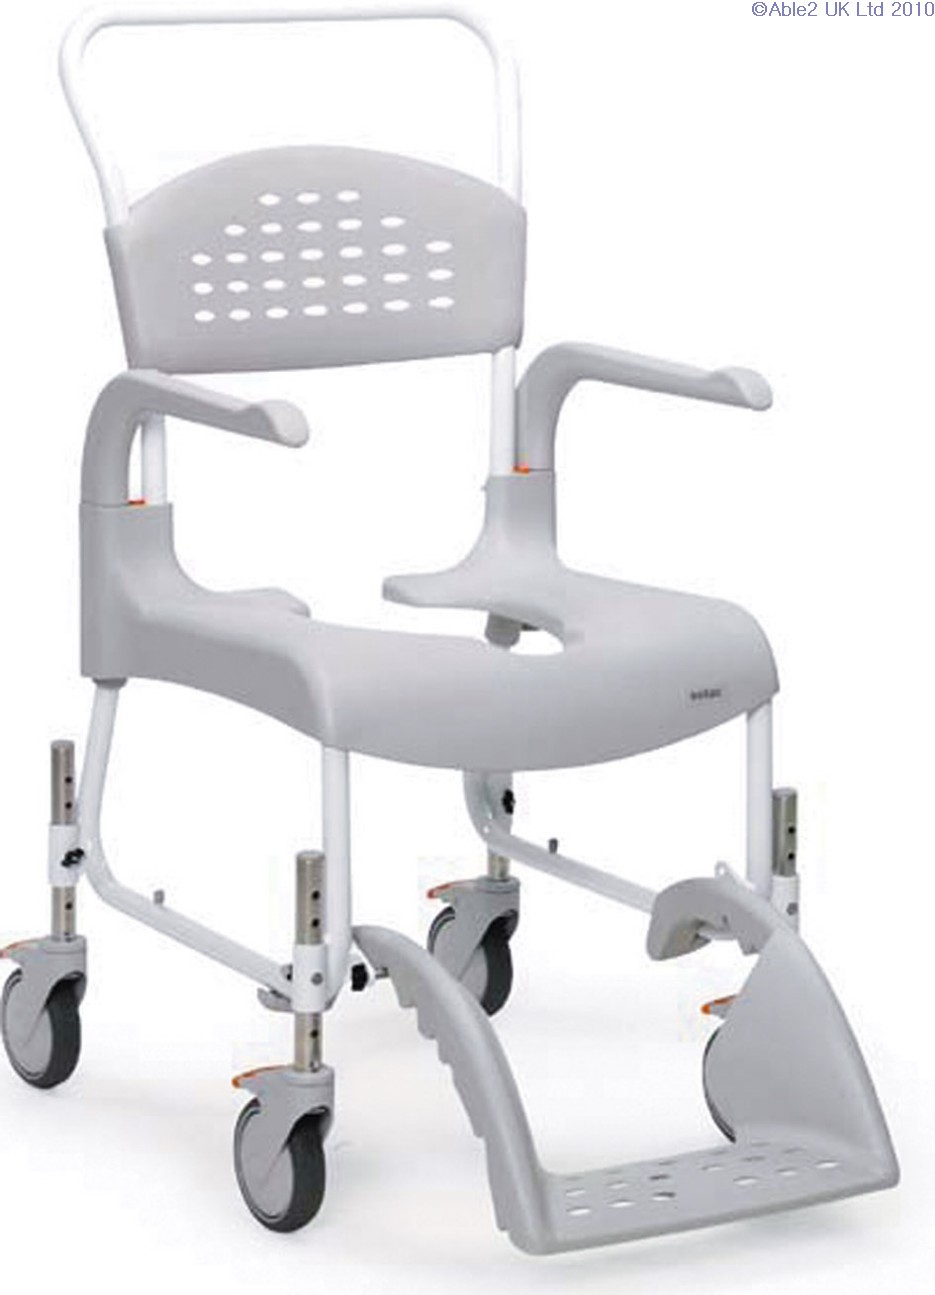 Clean Shower & Toilet Chair - Adjustable Height